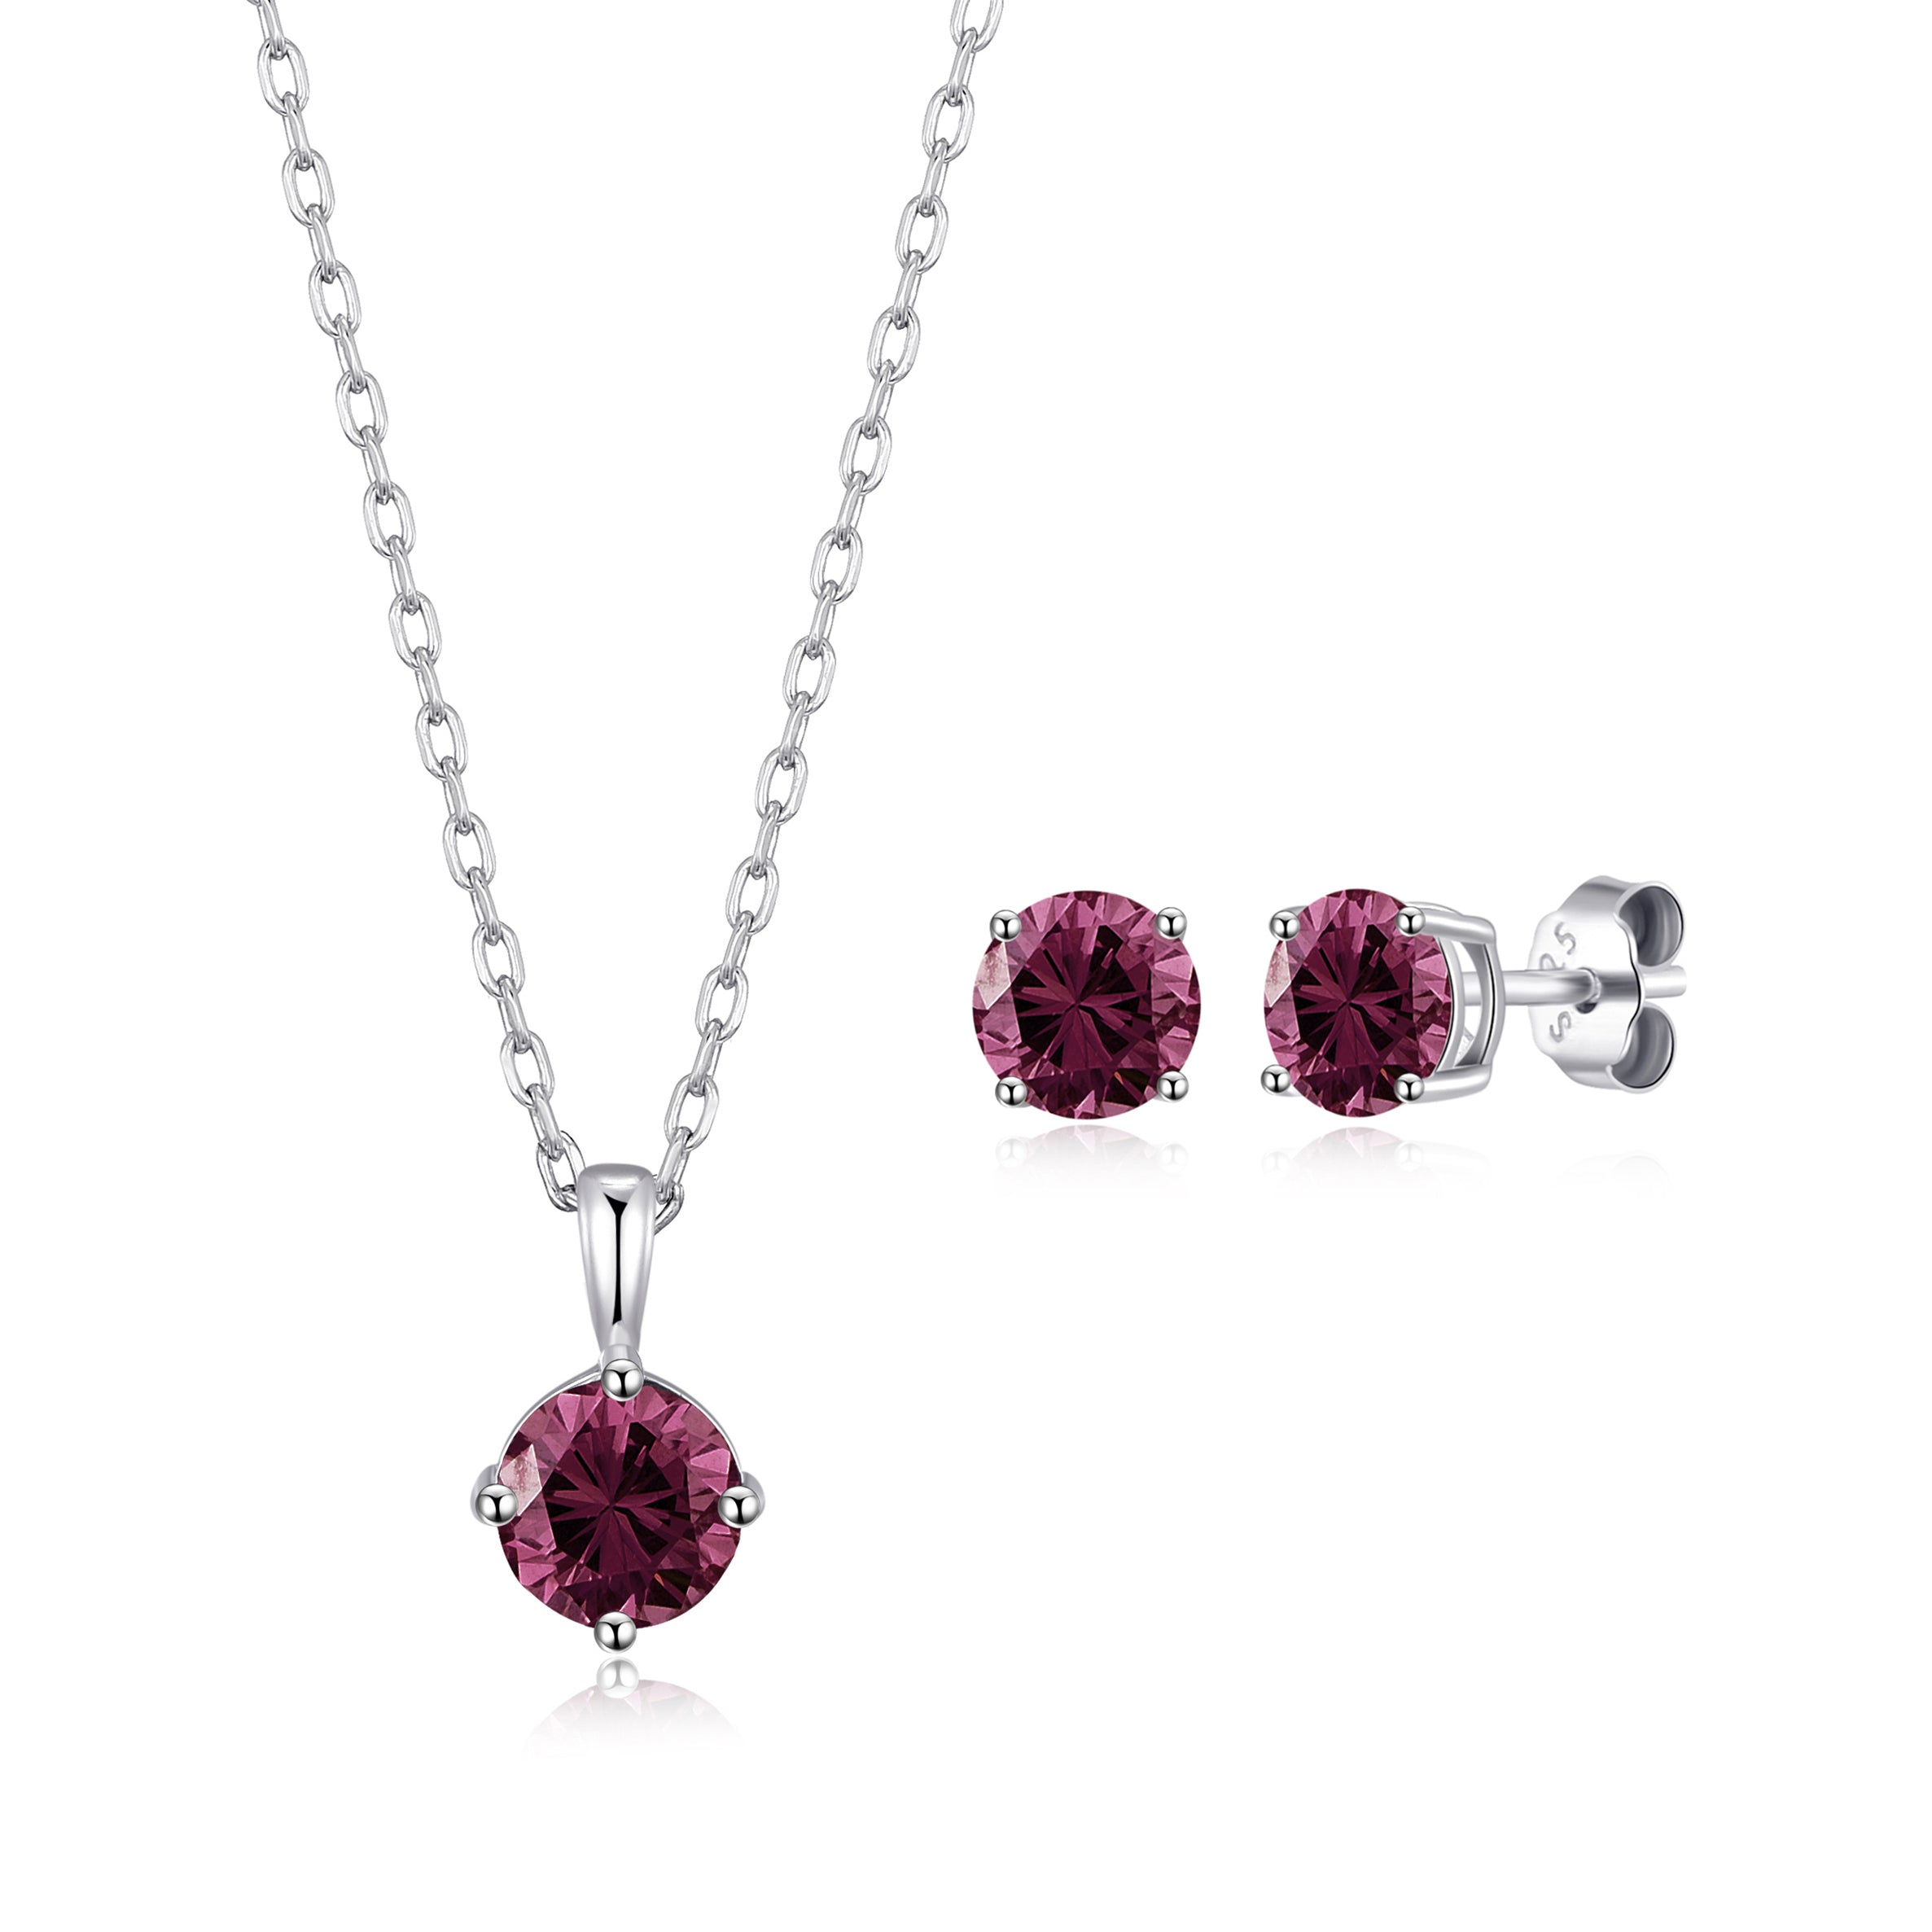 Sterling Silver June (Alexandrite) Birthstone Necklace & Earrings Set Created with Zircondia® Crystals by Philip Jones Jewellery